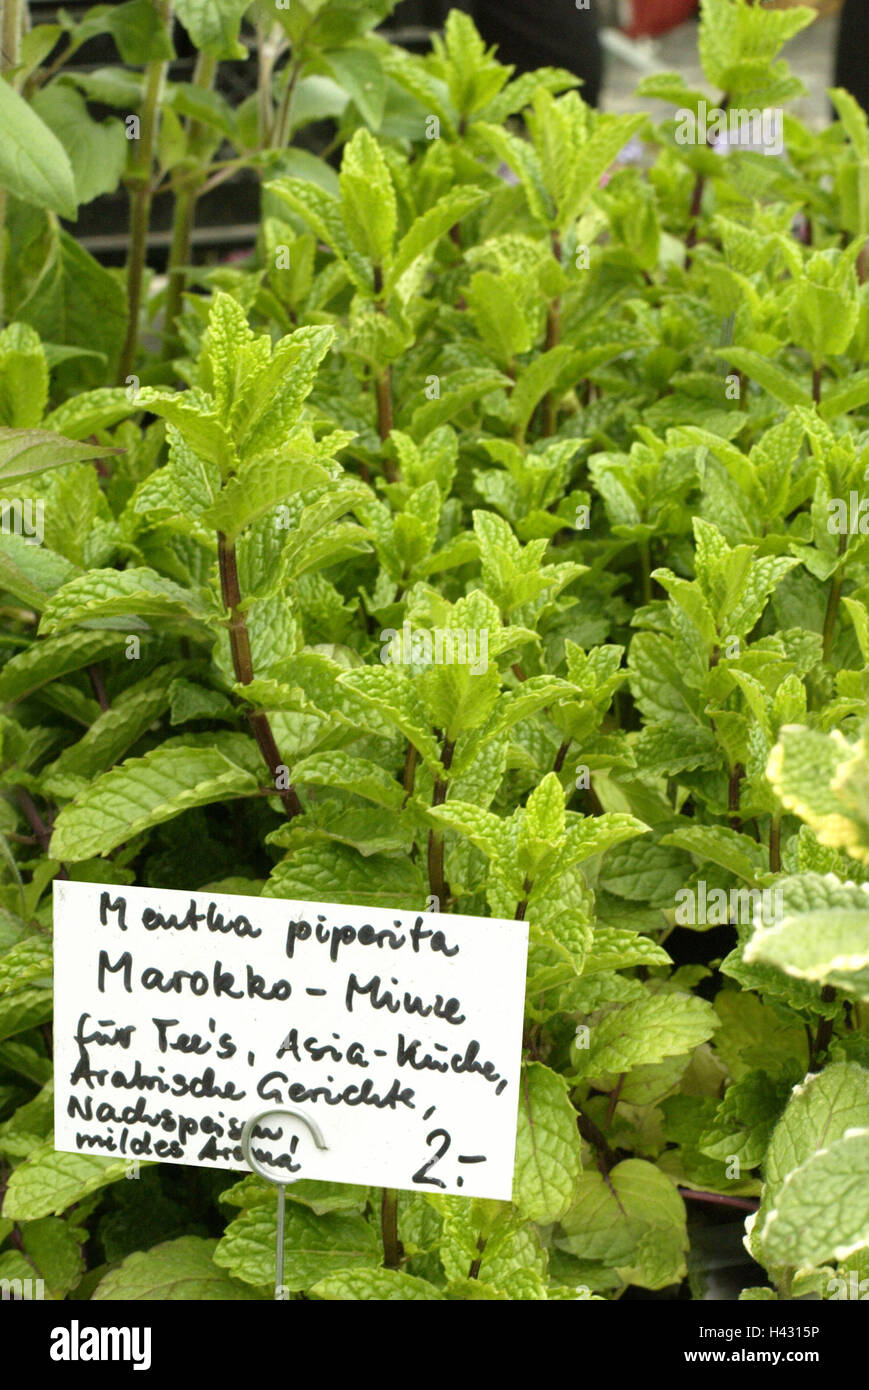 Market stall, sales, spice plants, Morocco mint, sign Market, Food market, Vegetable market, Food, Herbs, Herbs, Spices, Plants, freshly, sell, sign, price tag, name, plant name, offer, price, retail price, Still life, colour mood, colour green Stock Photo